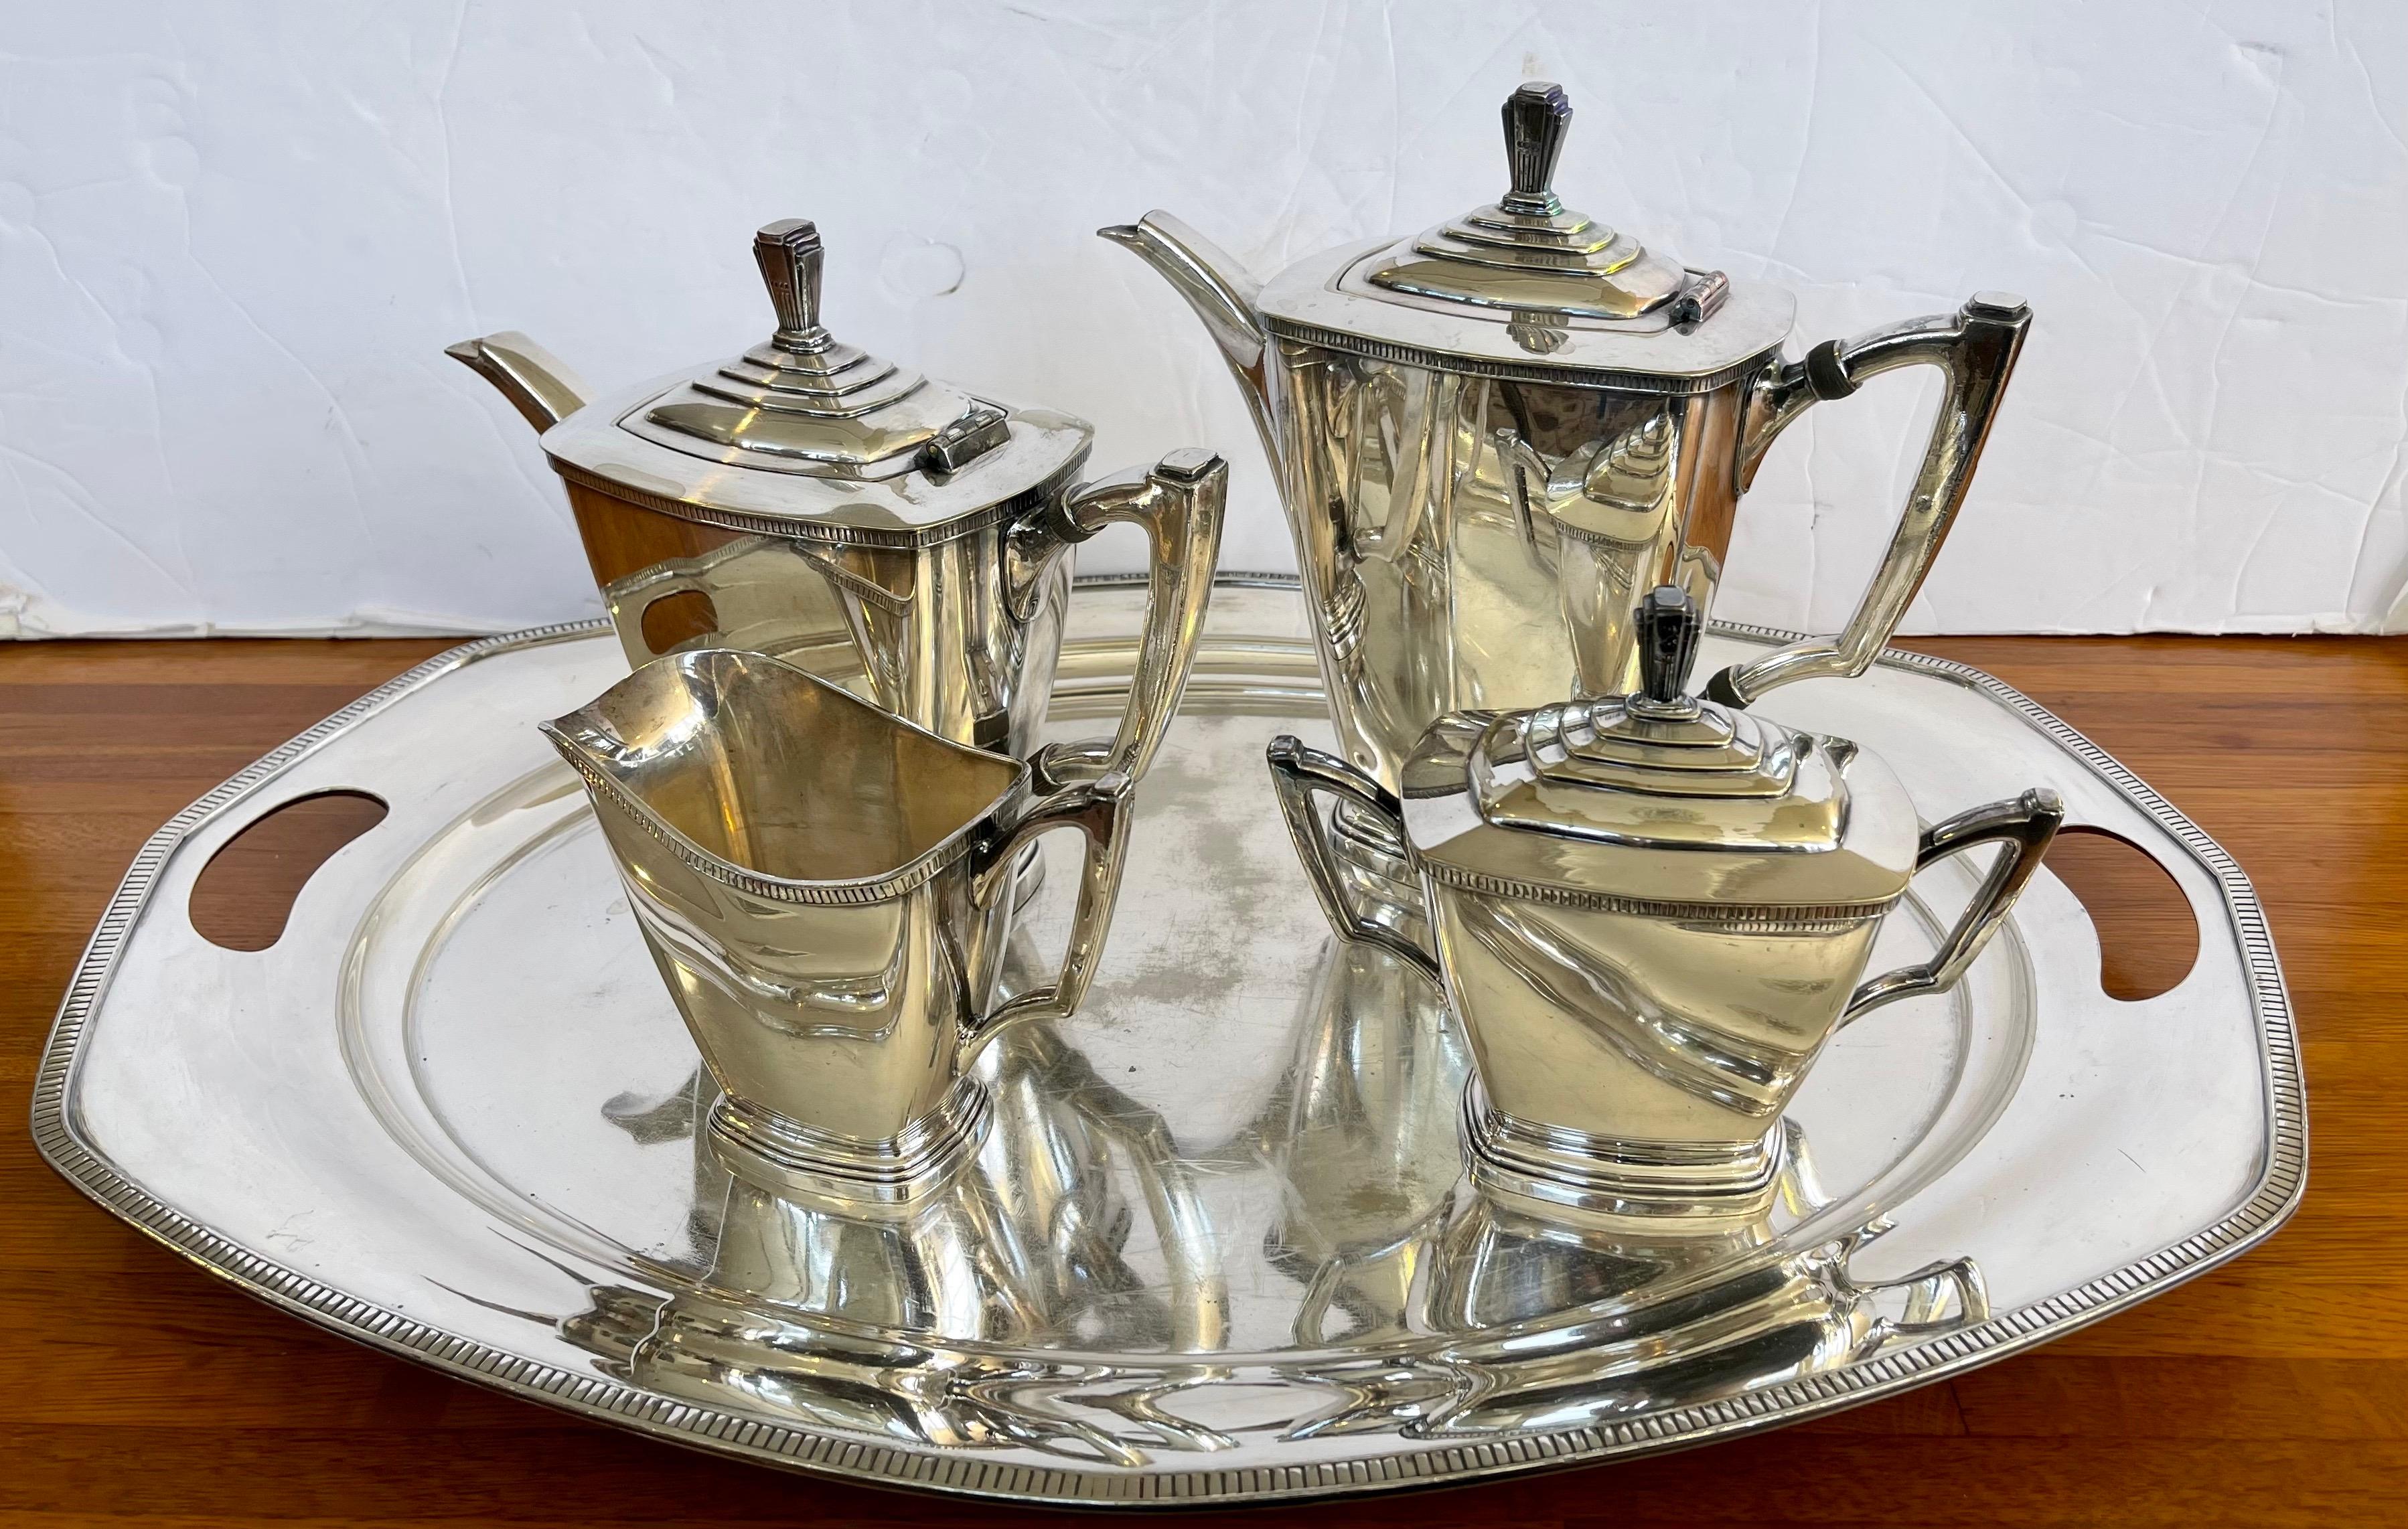 Elegant, mid twentieth century Art Deco style silver (not sterling) tea set by Wallace Silversmiths. No monograms. Stylish and sleek with matching tray that has hollowed handles. Would benefit from a nice polish but spectacular otherwise. The Art